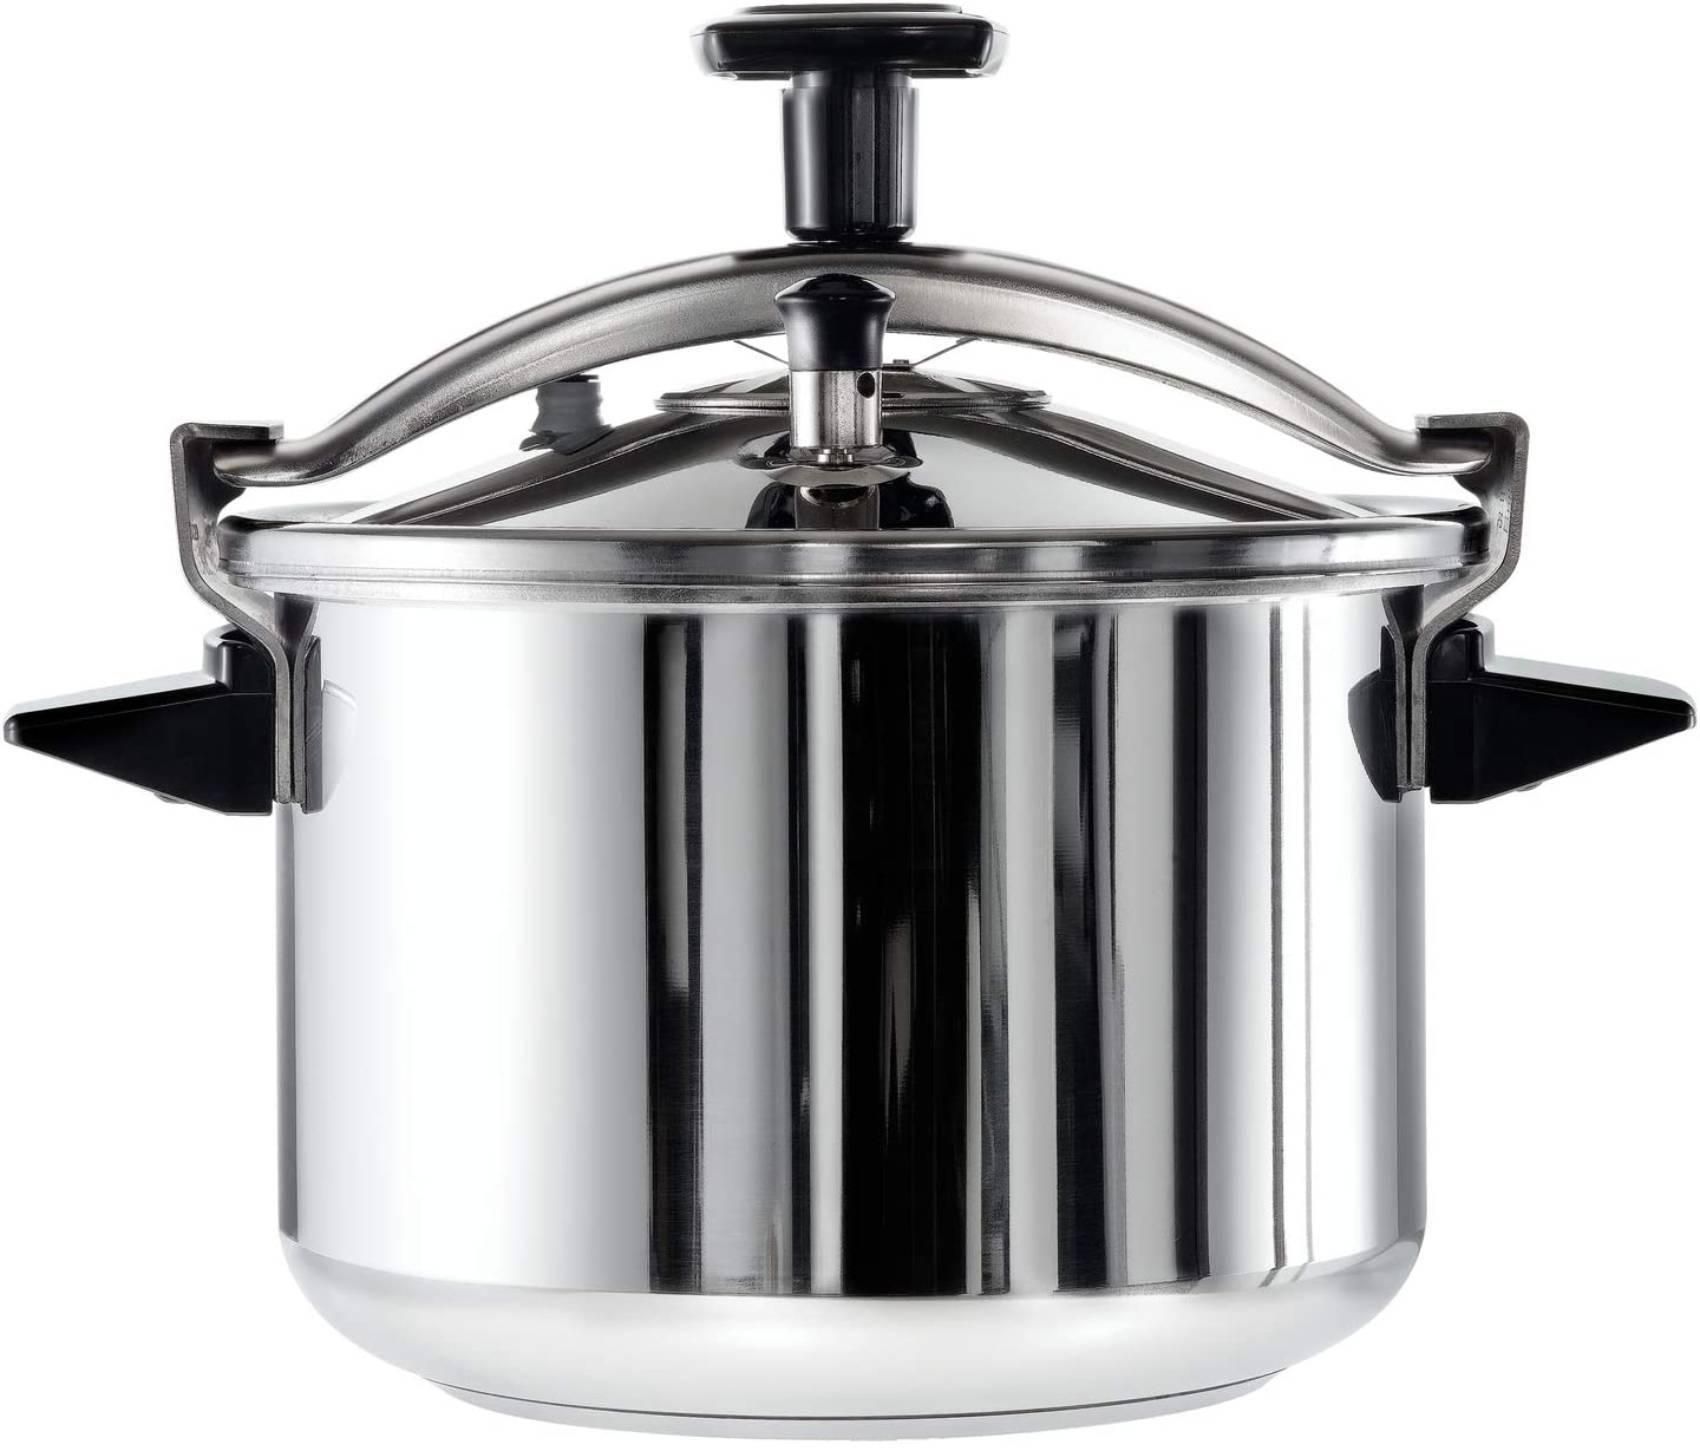 Tefal Authentic Stainless Steel Pressure Cooker Silver 12L